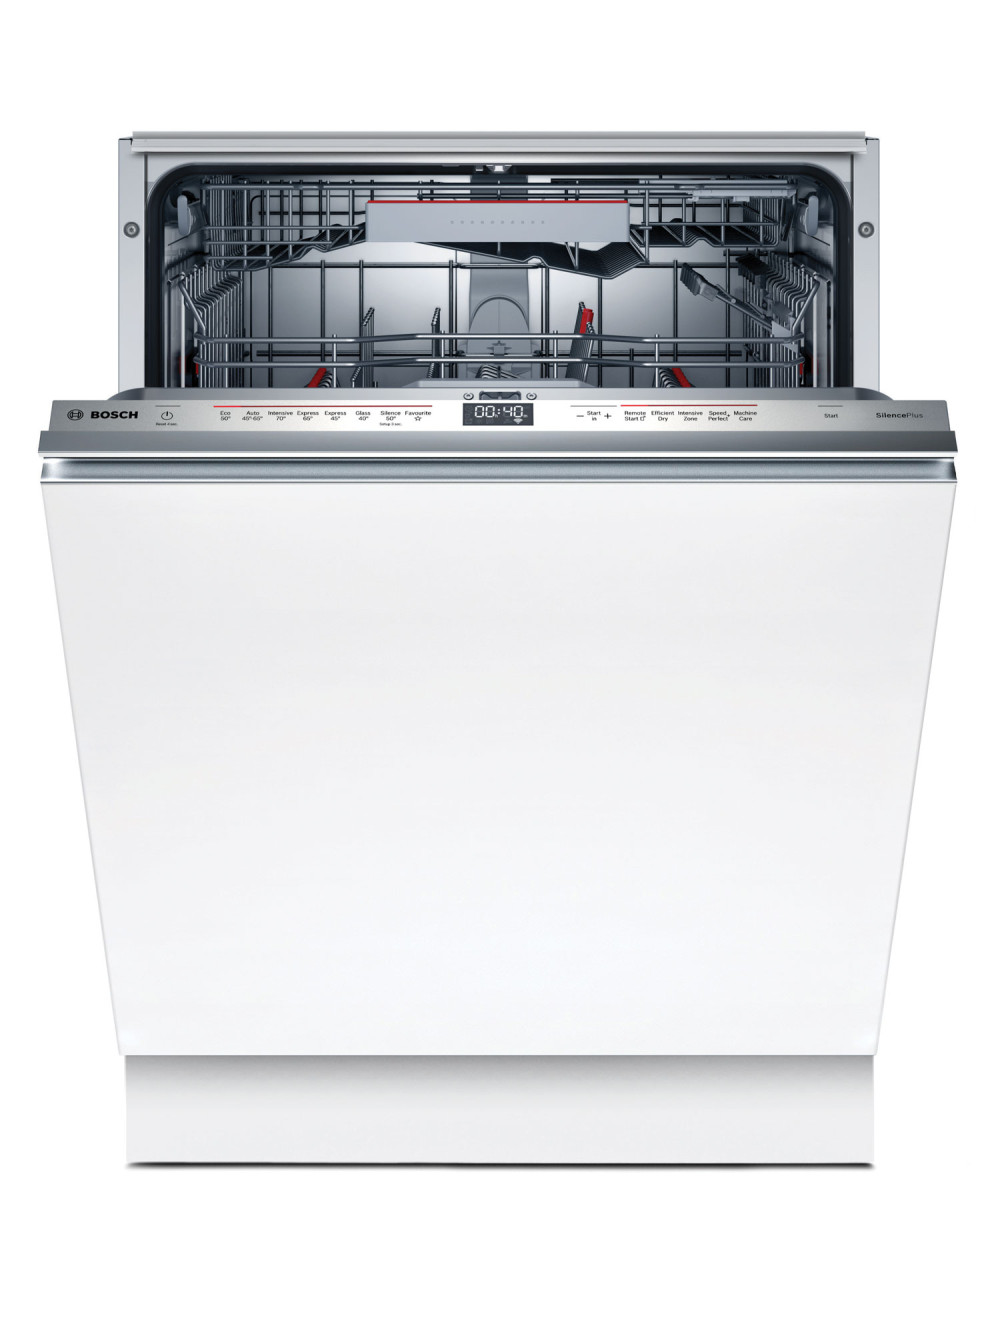 Bosch SMD6EDX57G Series 6 Fully-Integrated Dishwasher featured image